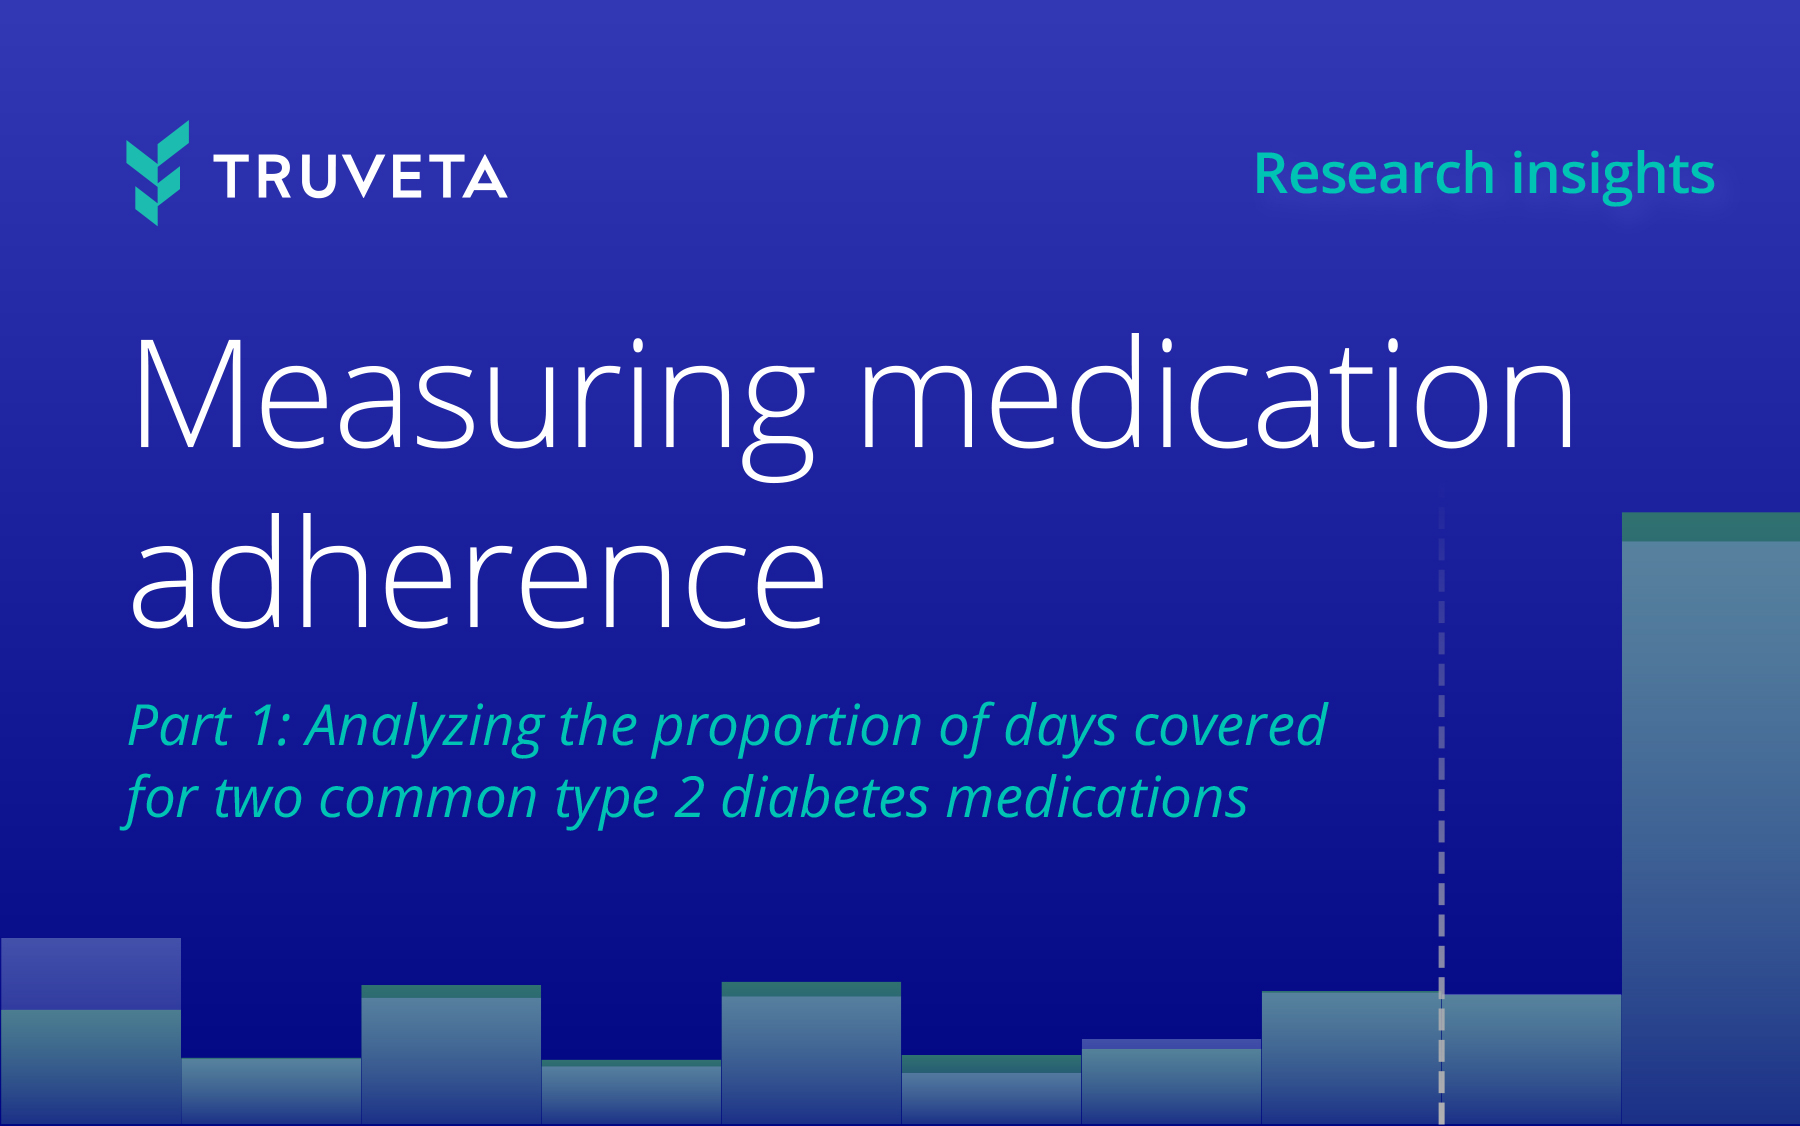 Measuring medication adherence for two common type 2 diabetes medications